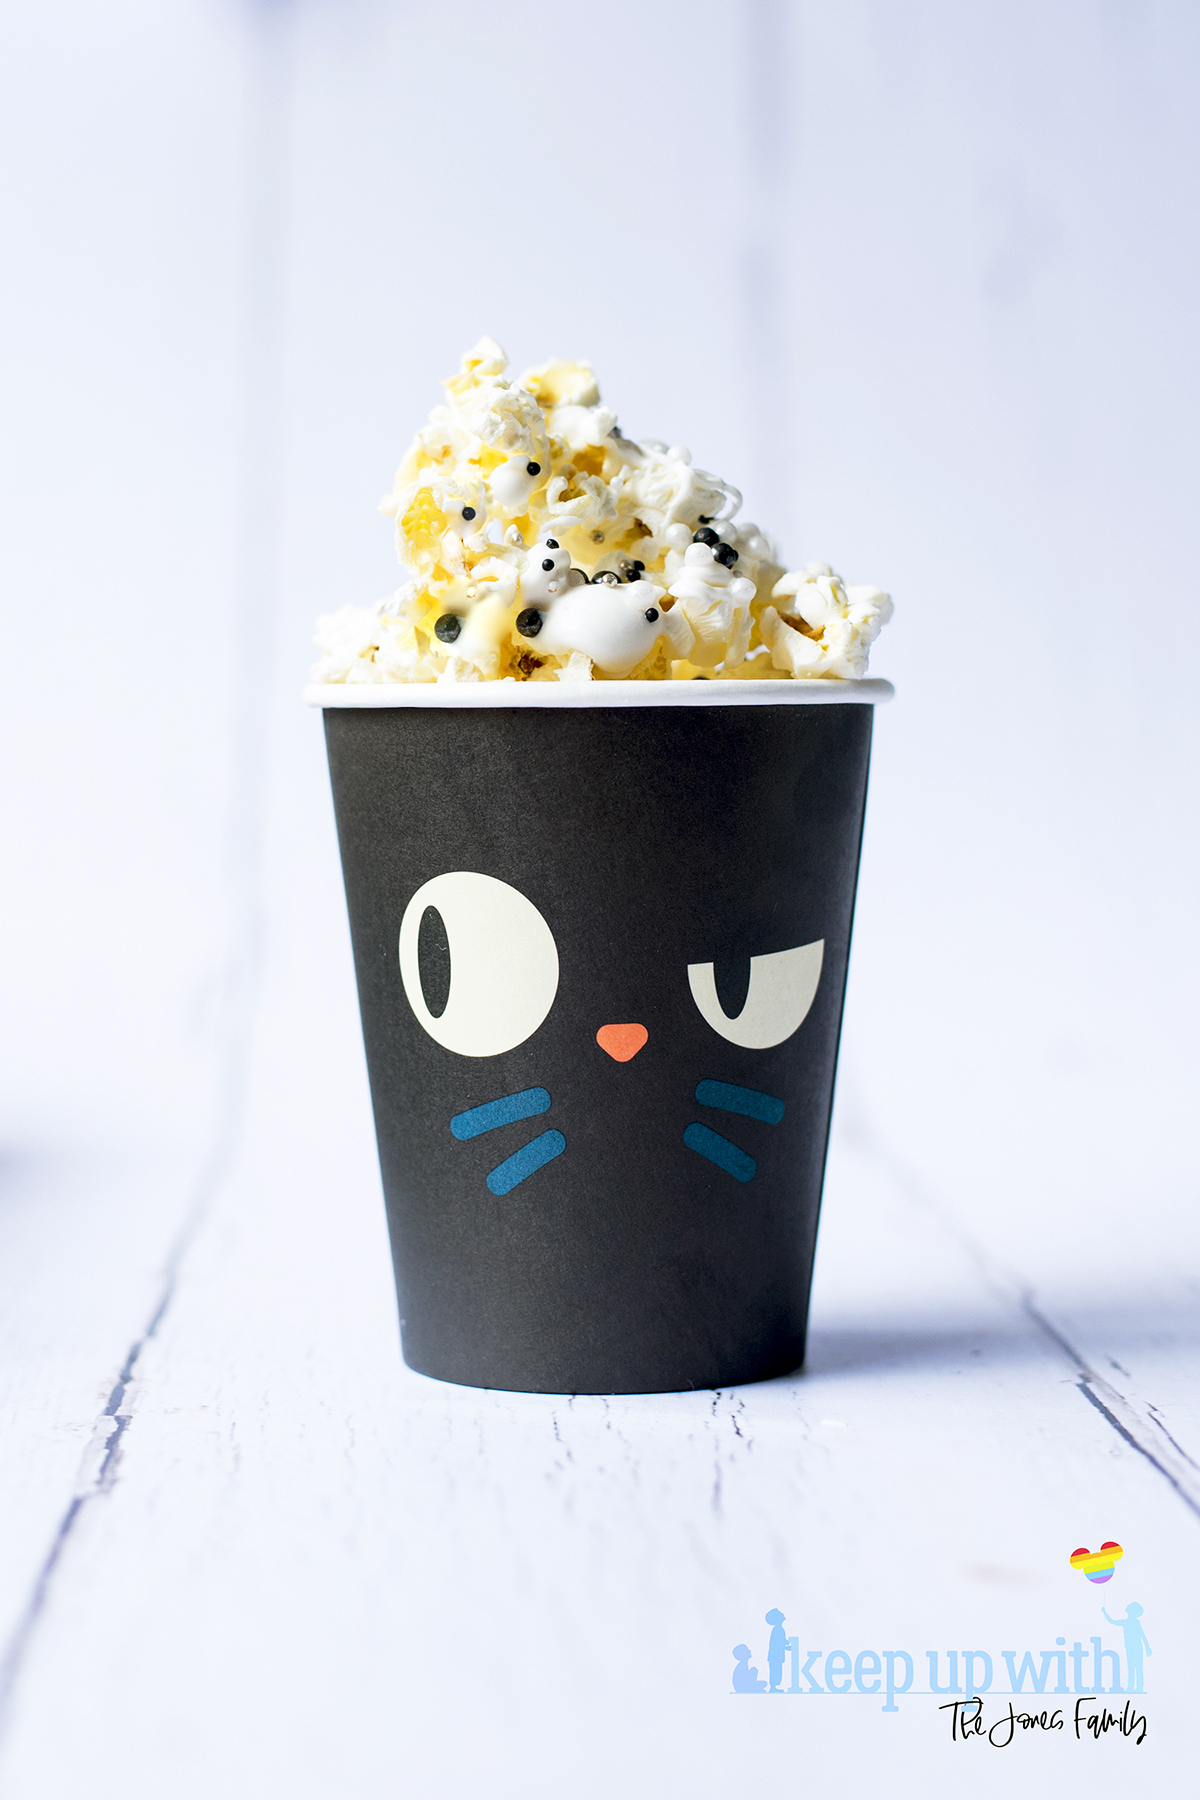 Image shows a black cat paper cup filled with disney's hocus pocus popcorn. image by keep up with the jones family.